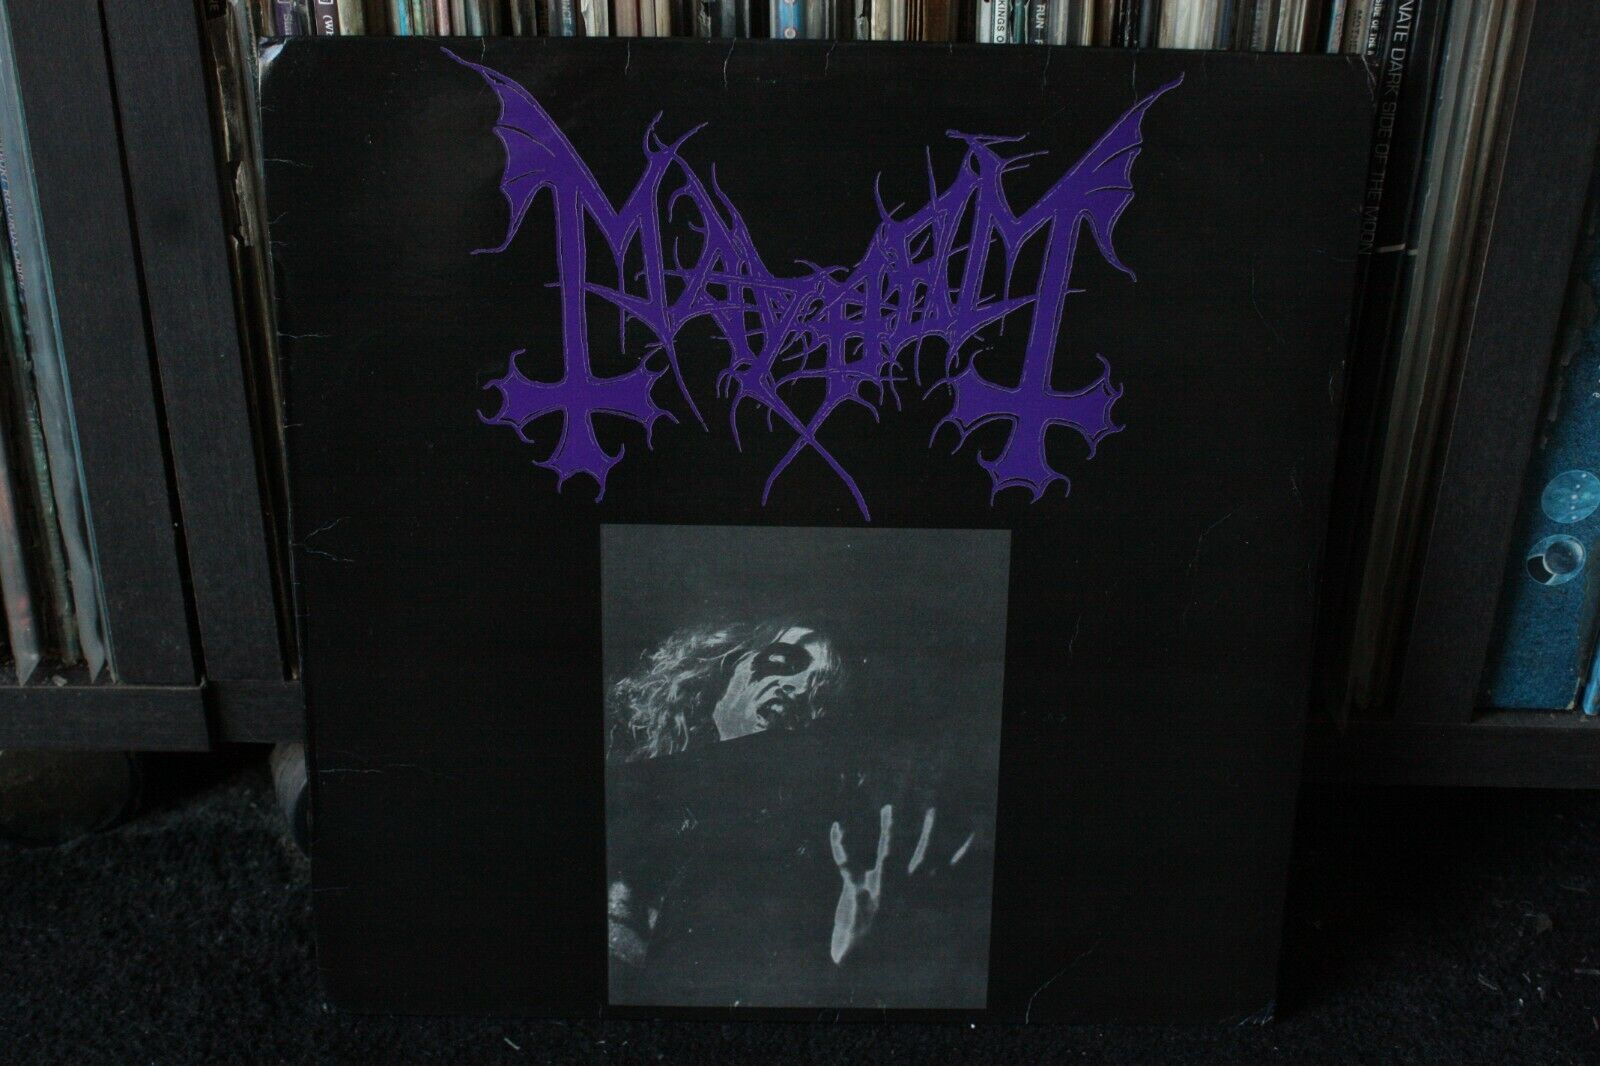 MAYHEM LIVE IN LEIPZIG ORIGINAL GLORIOUS  FIRST PRESSING  1994 RARE OBSCURE   LP